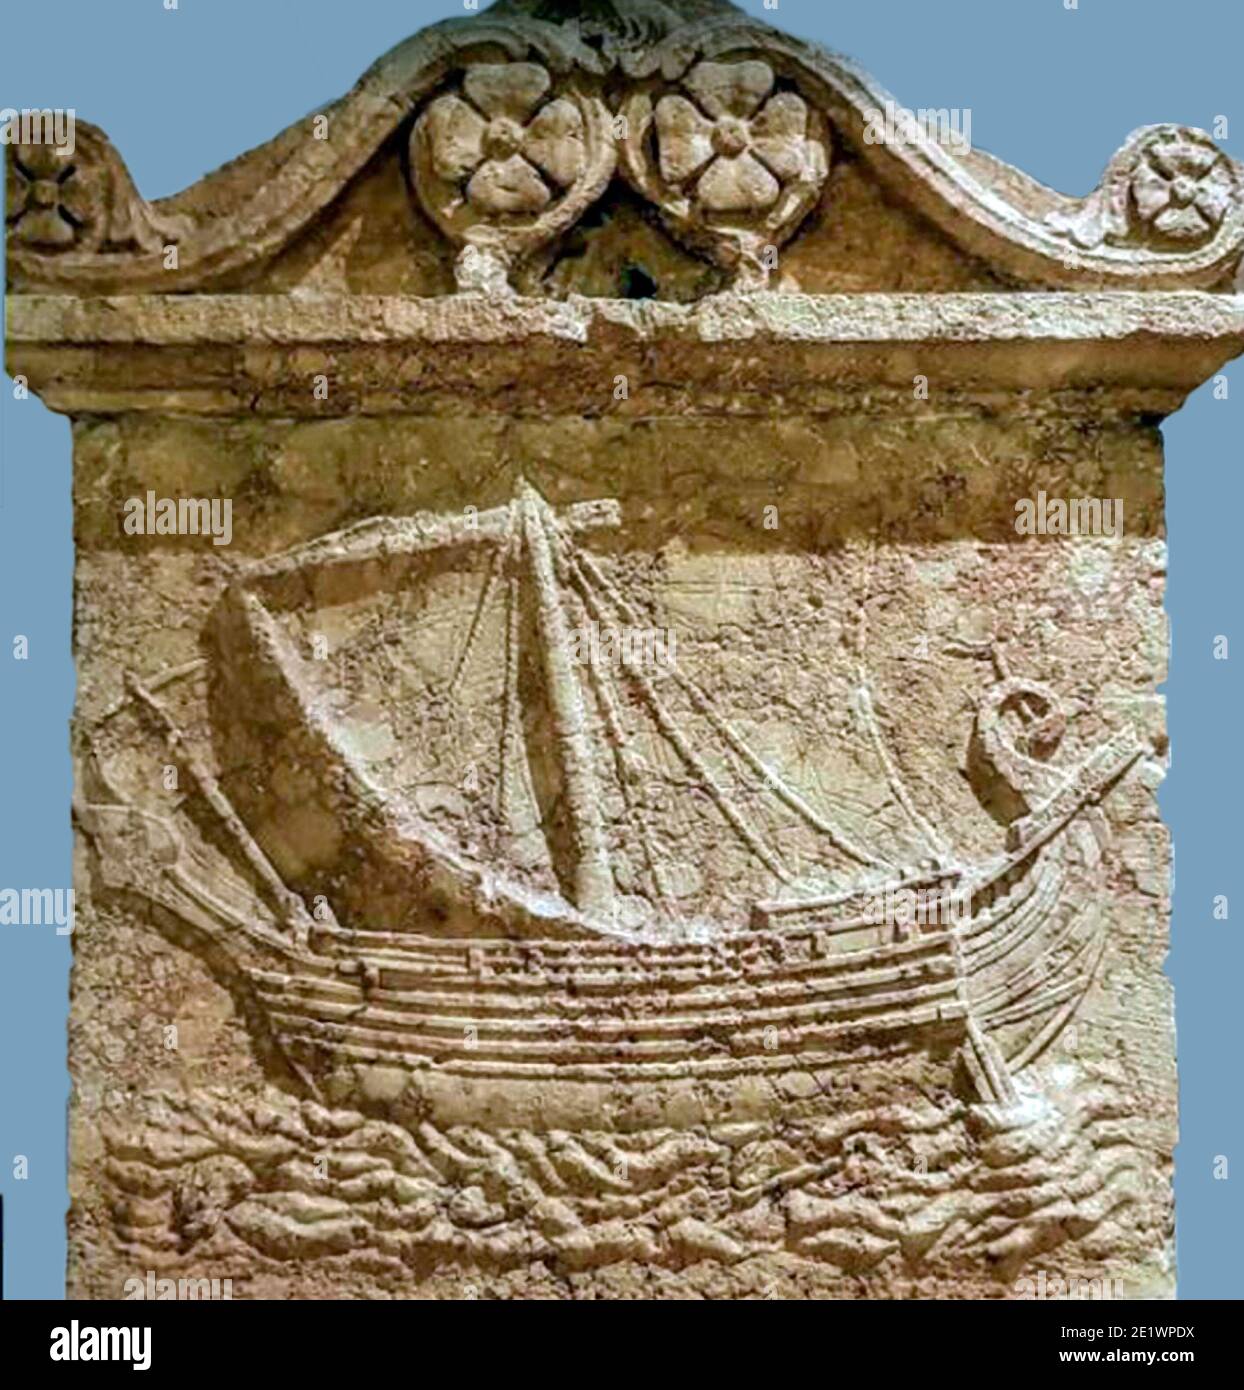 6790. Relief from a sarcophag depicting a Roman merchant sailing ship, c. 1st. C. AD. Stock Photo